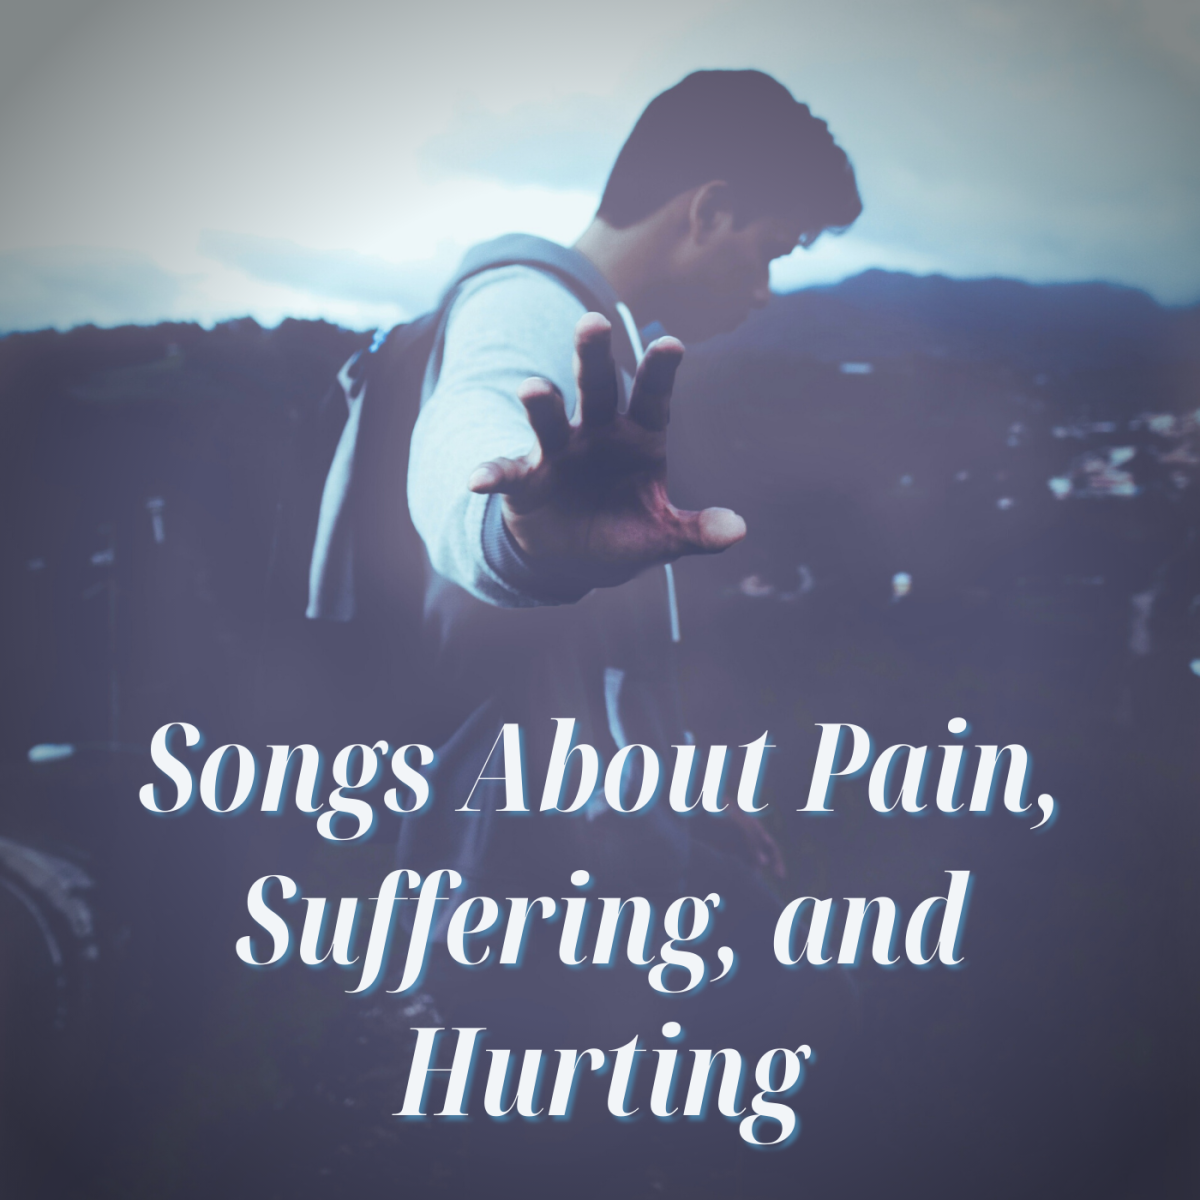 Whether you're in physical pain or feel the mental anguish of heartbreak or grief, we all suffer. Know that you're not alone. Make a playlist of pop, rock, and country songs about pain, suffering, and hurting.